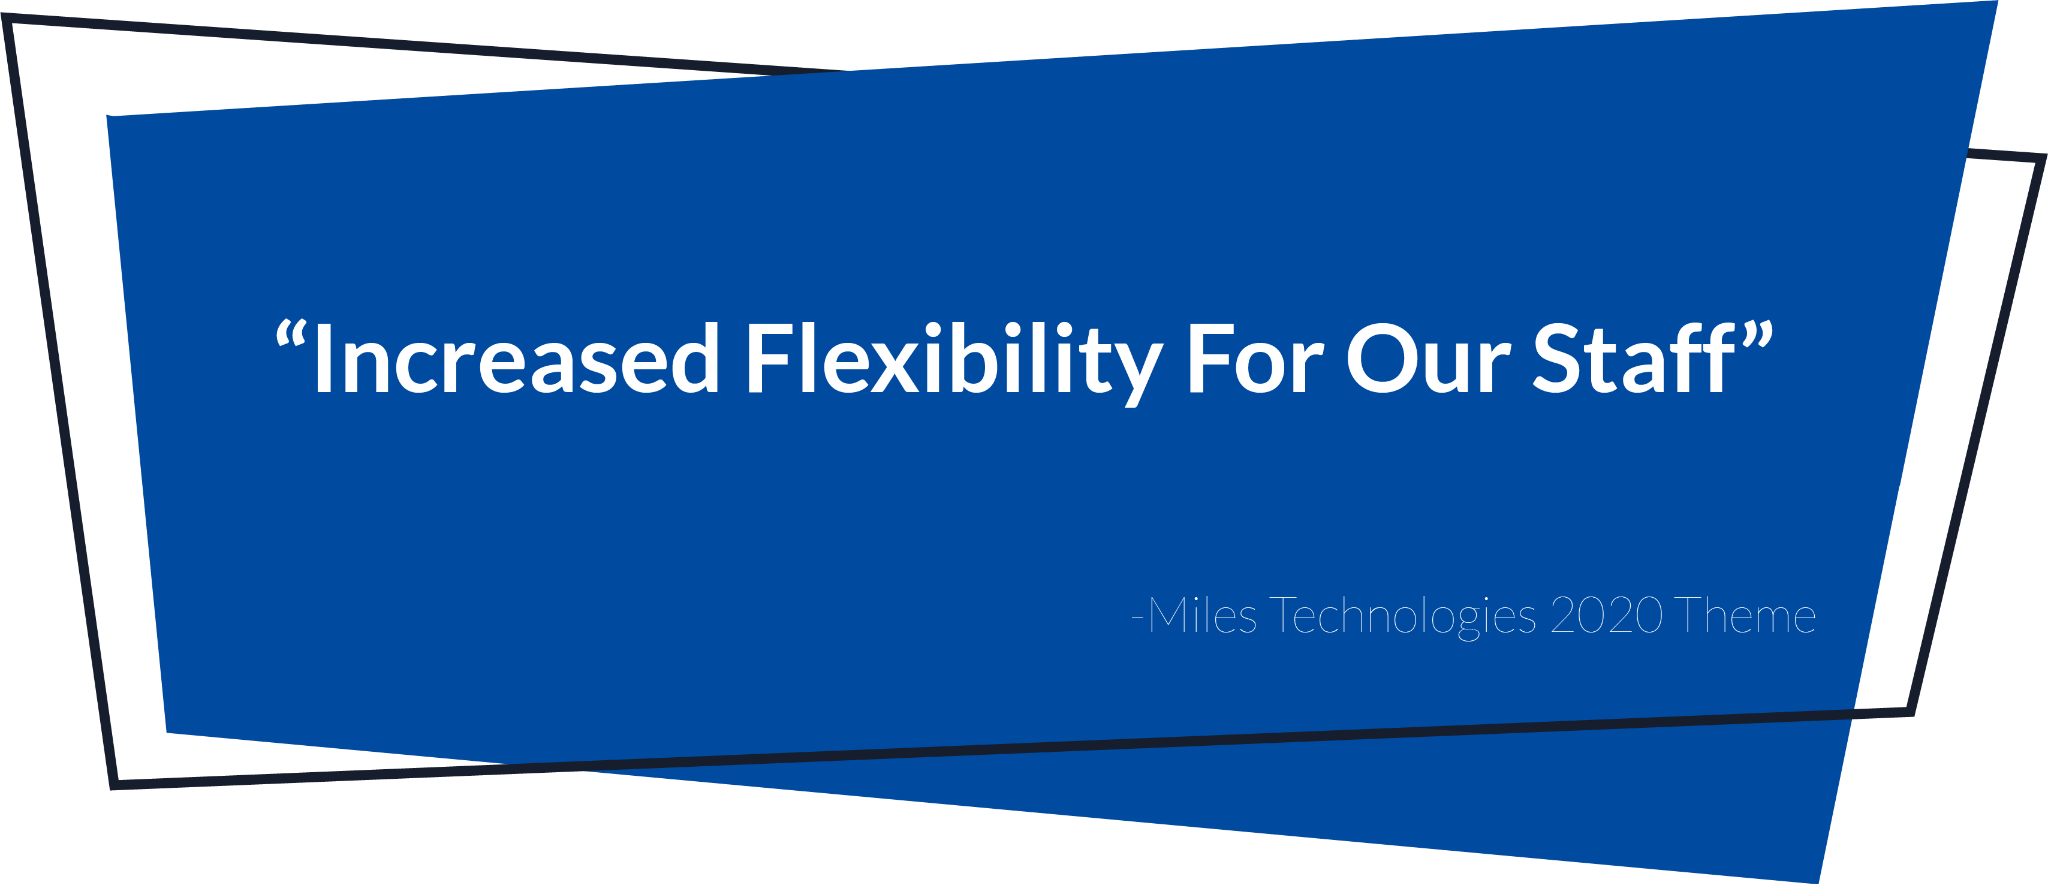 miles-technologies-2020-theme-increased-flexibility-for-our-staff